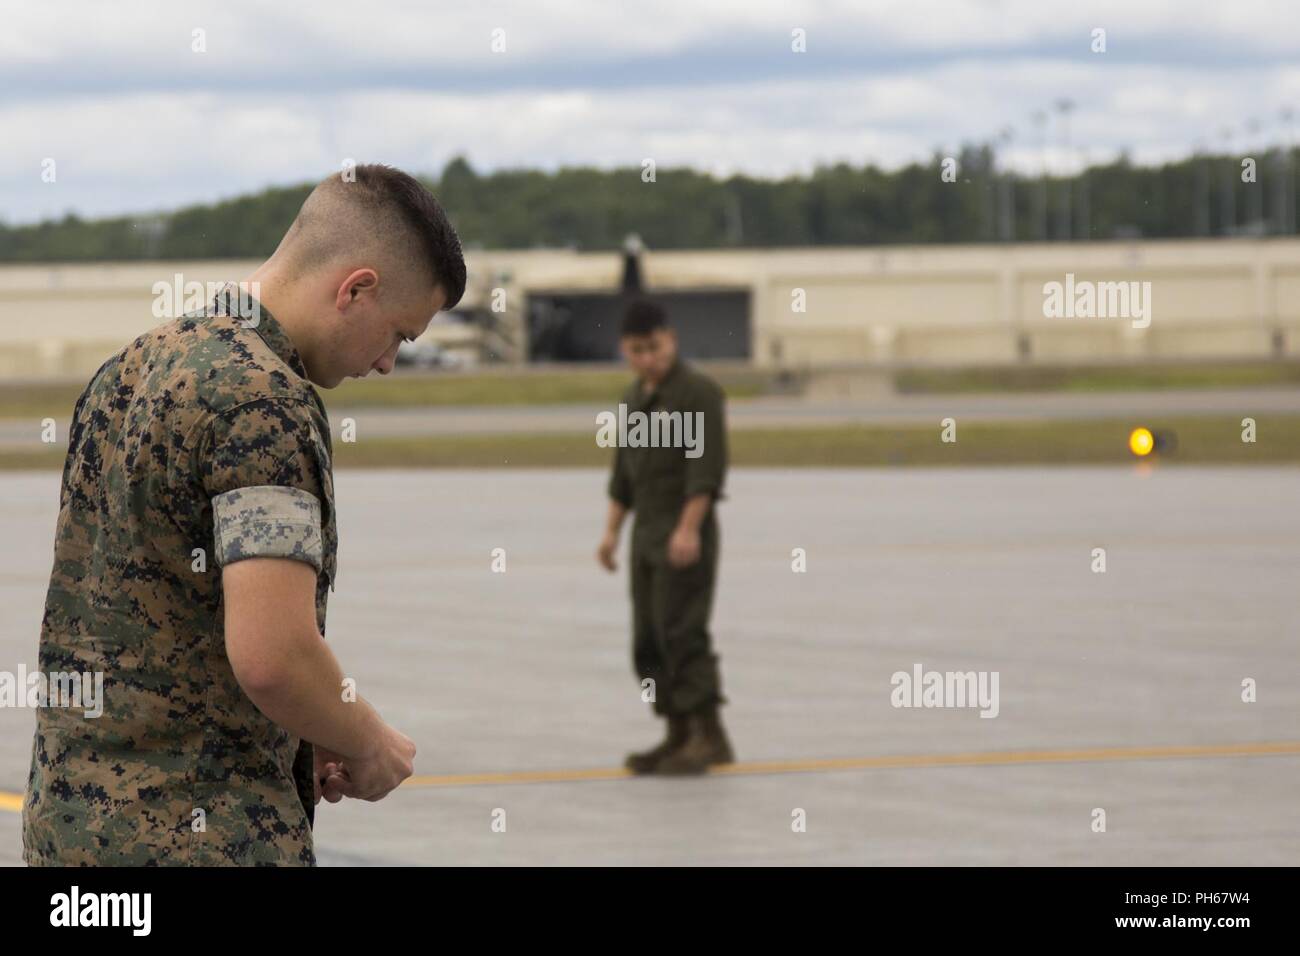 Lance Cpl. Raymond Boule, an airframe maintenance technician assigned to Marine Attack Squadron (VMA) 214, conducts a Foreign Object Debris (FOD) walk in preparation for the arrival of their AV-8B Harriers at Joint Base Elmendorf-Richardson, Alaska, June 27, 2018. VMA-214 will participate in the 2018 Arctic Thunder Air Show with a flyby, hover demonstration, and a static display. Stock Photo